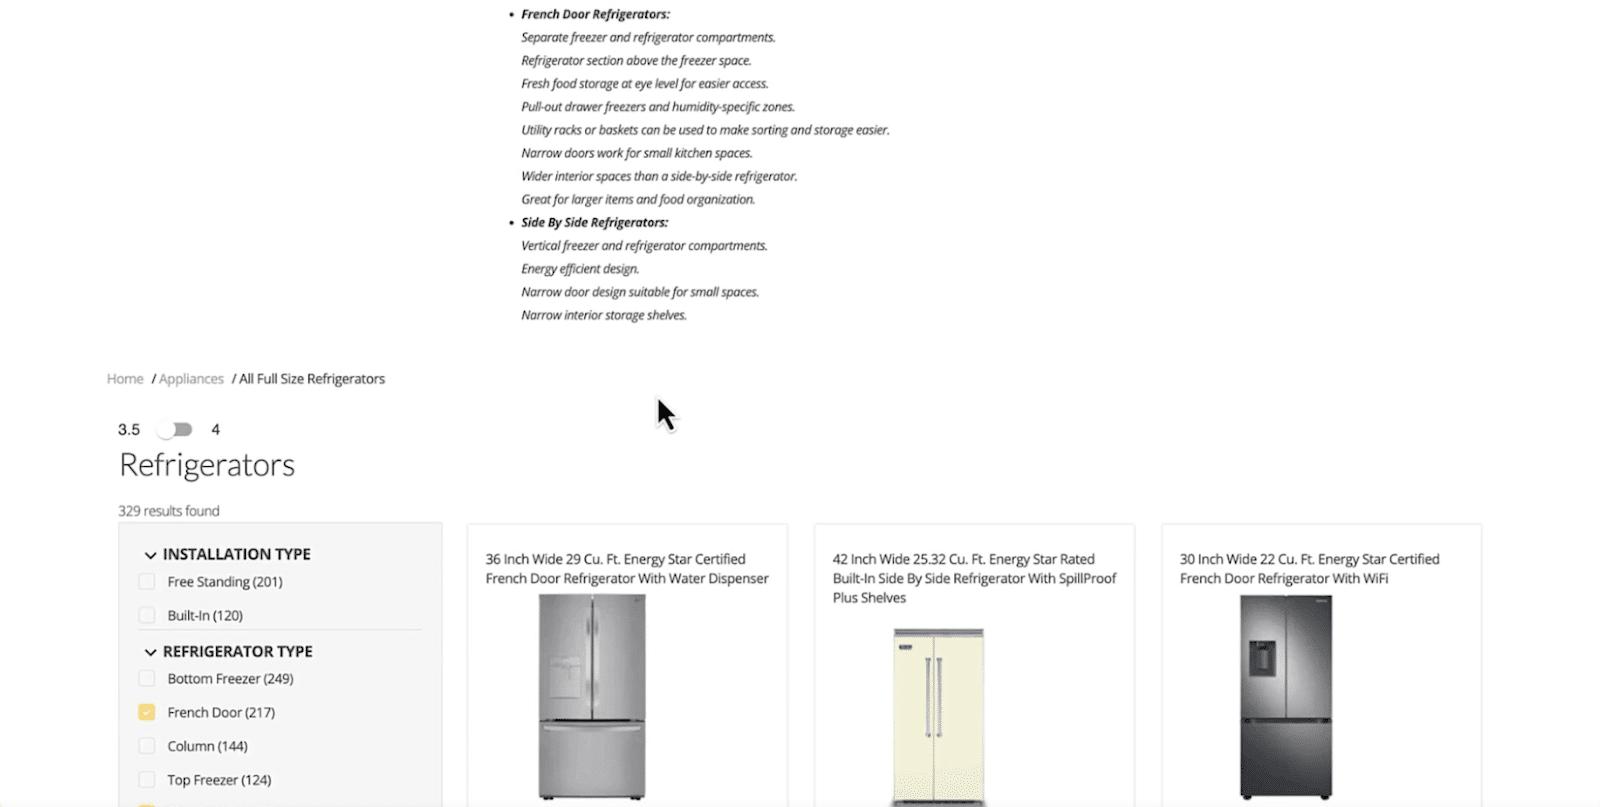 A screenshot of a product listing page for refrigerators on a retail website, powered by Lucidworks AI. The page features filter options for installation type and refrigerator type, along with a search bar and sorting options. Three refrigerator models are displayed, each with a brief description and image.